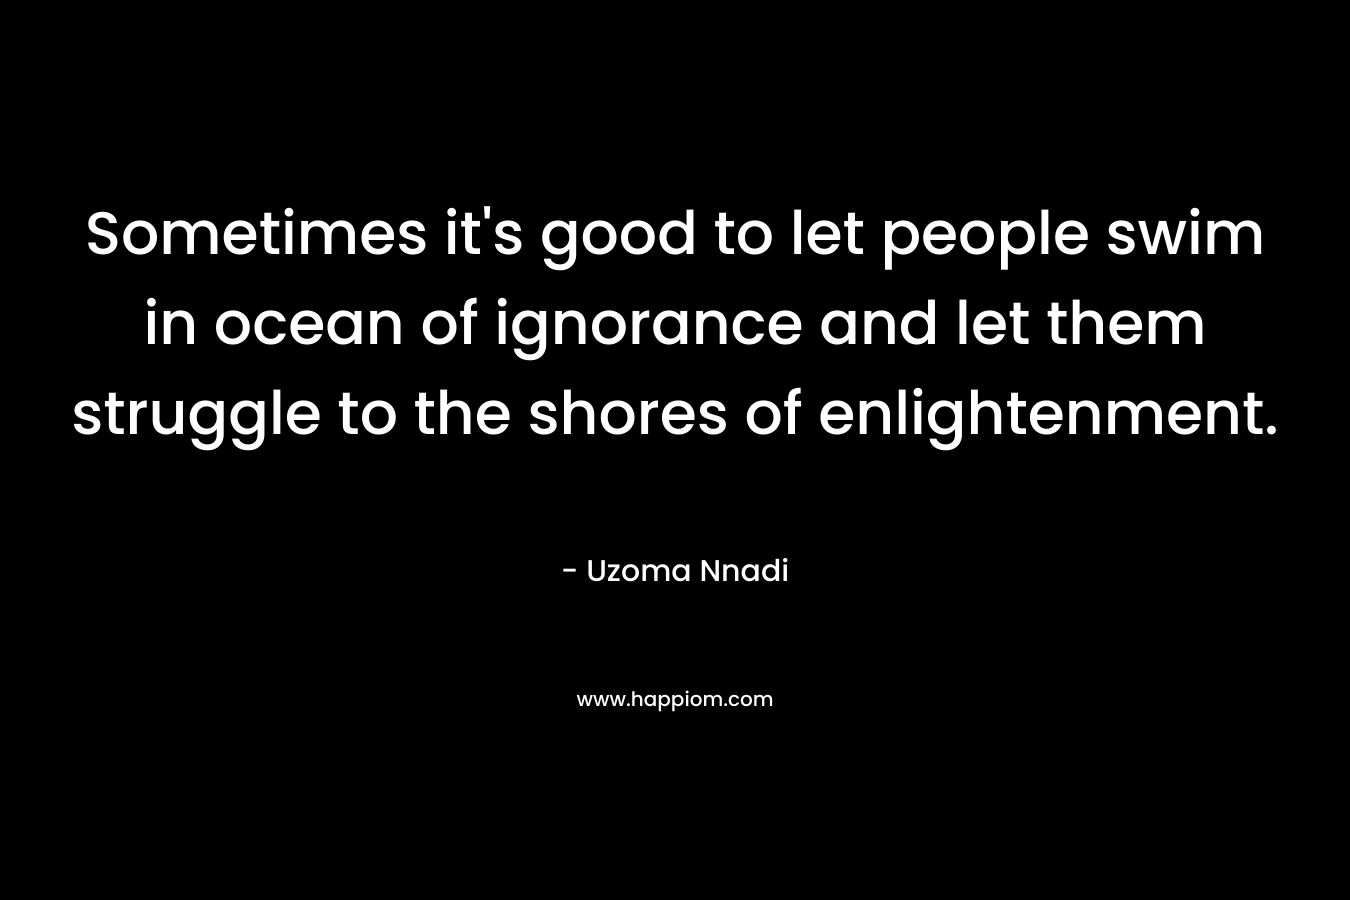 Sometimes it’s good to let people swim in ocean of ignorance and let them struggle to the shores of enlightenment. – Uzoma Nnadi